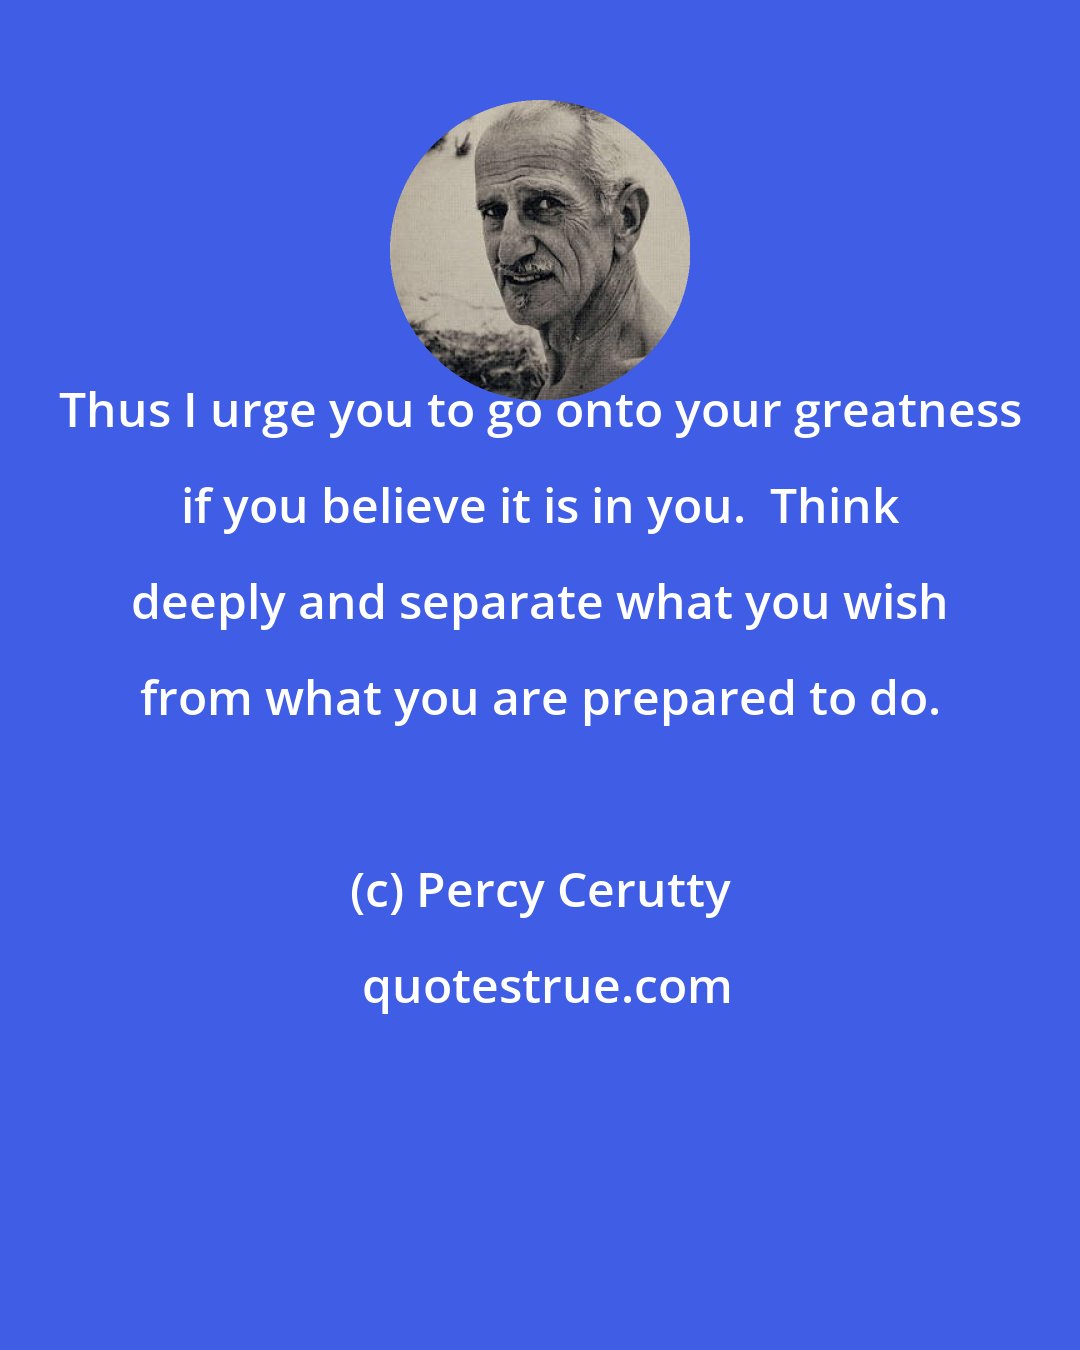 Percy Cerutty: Thus I urge you to go onto your greatness if you believe it is in you.  Think deeply and separate what you wish from what you are prepared to do.